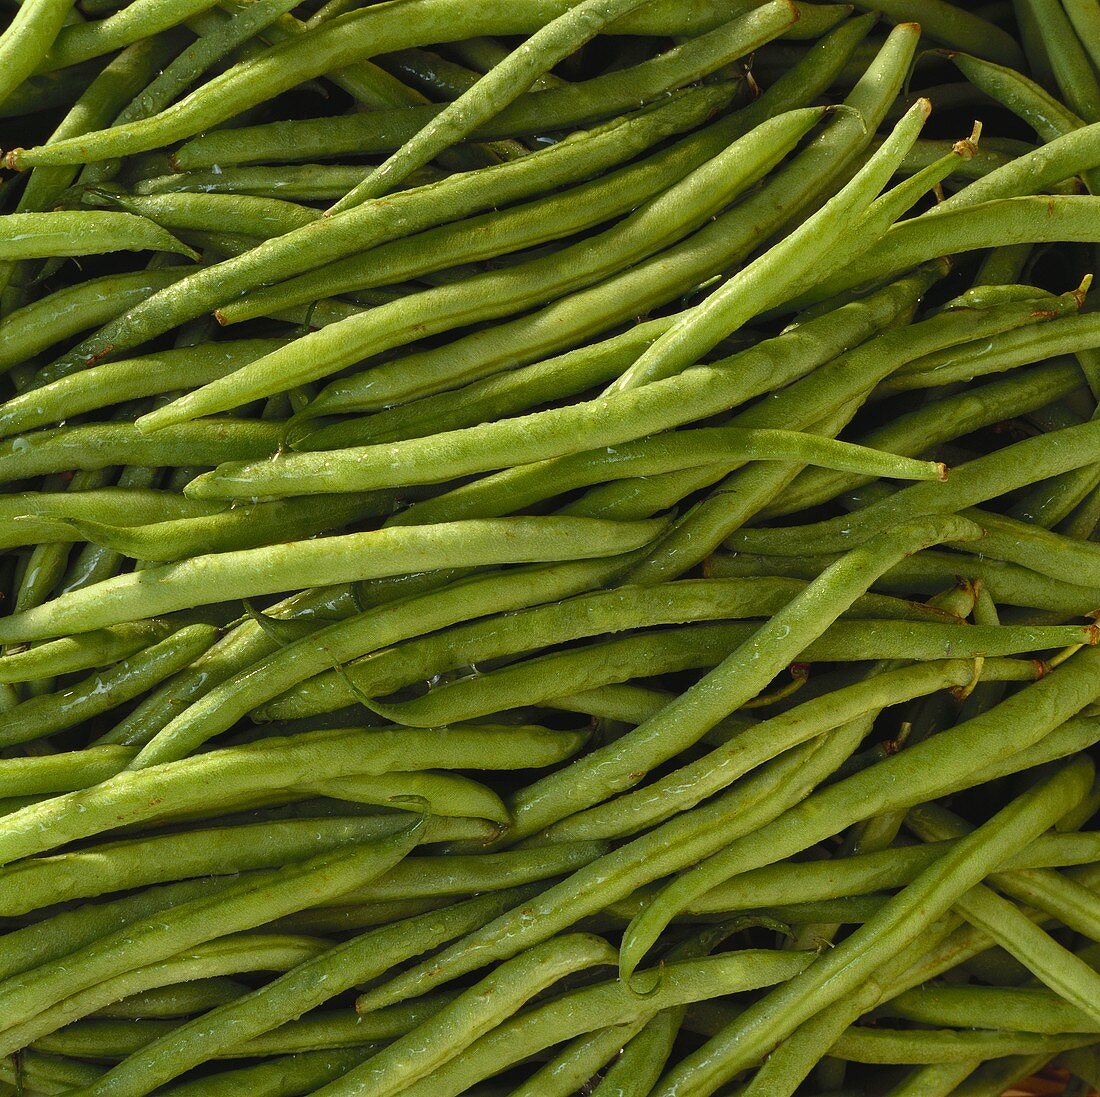 Haricots verts (type of green bean, filling the picture) 